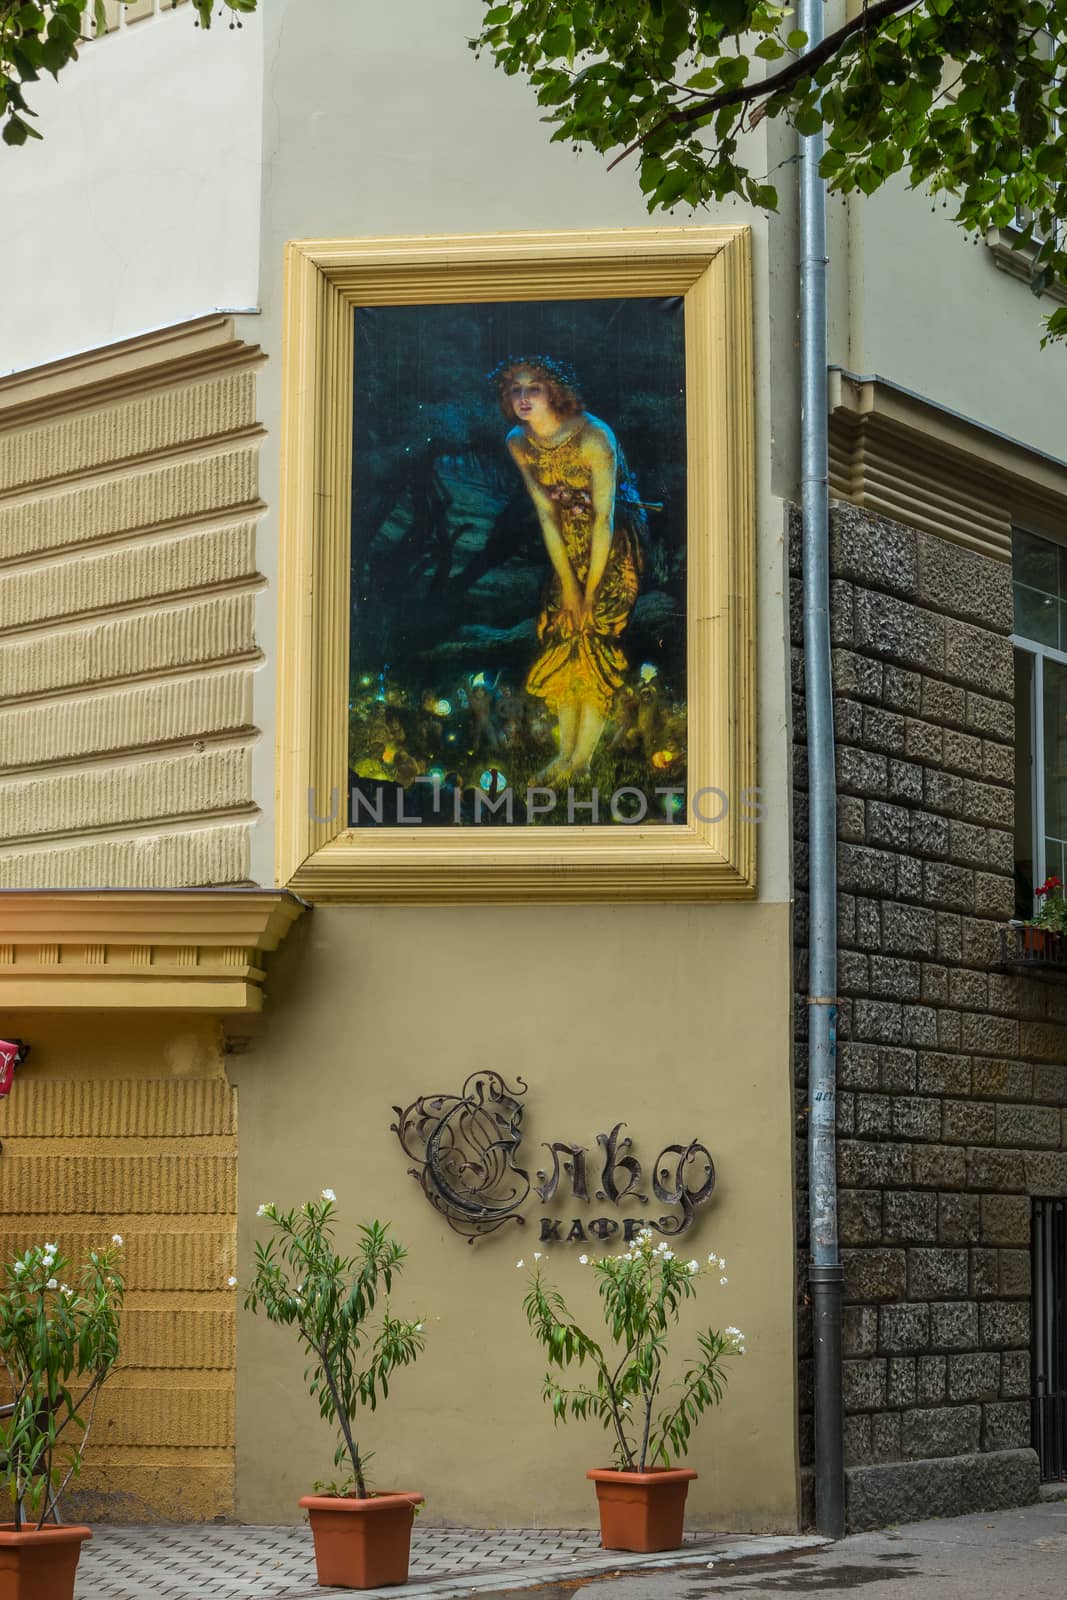 A large picture in the frame with a painted girl on the wall of the house with an inscription cafe under it. And standing flowers in pots on the sidewalk near the house.